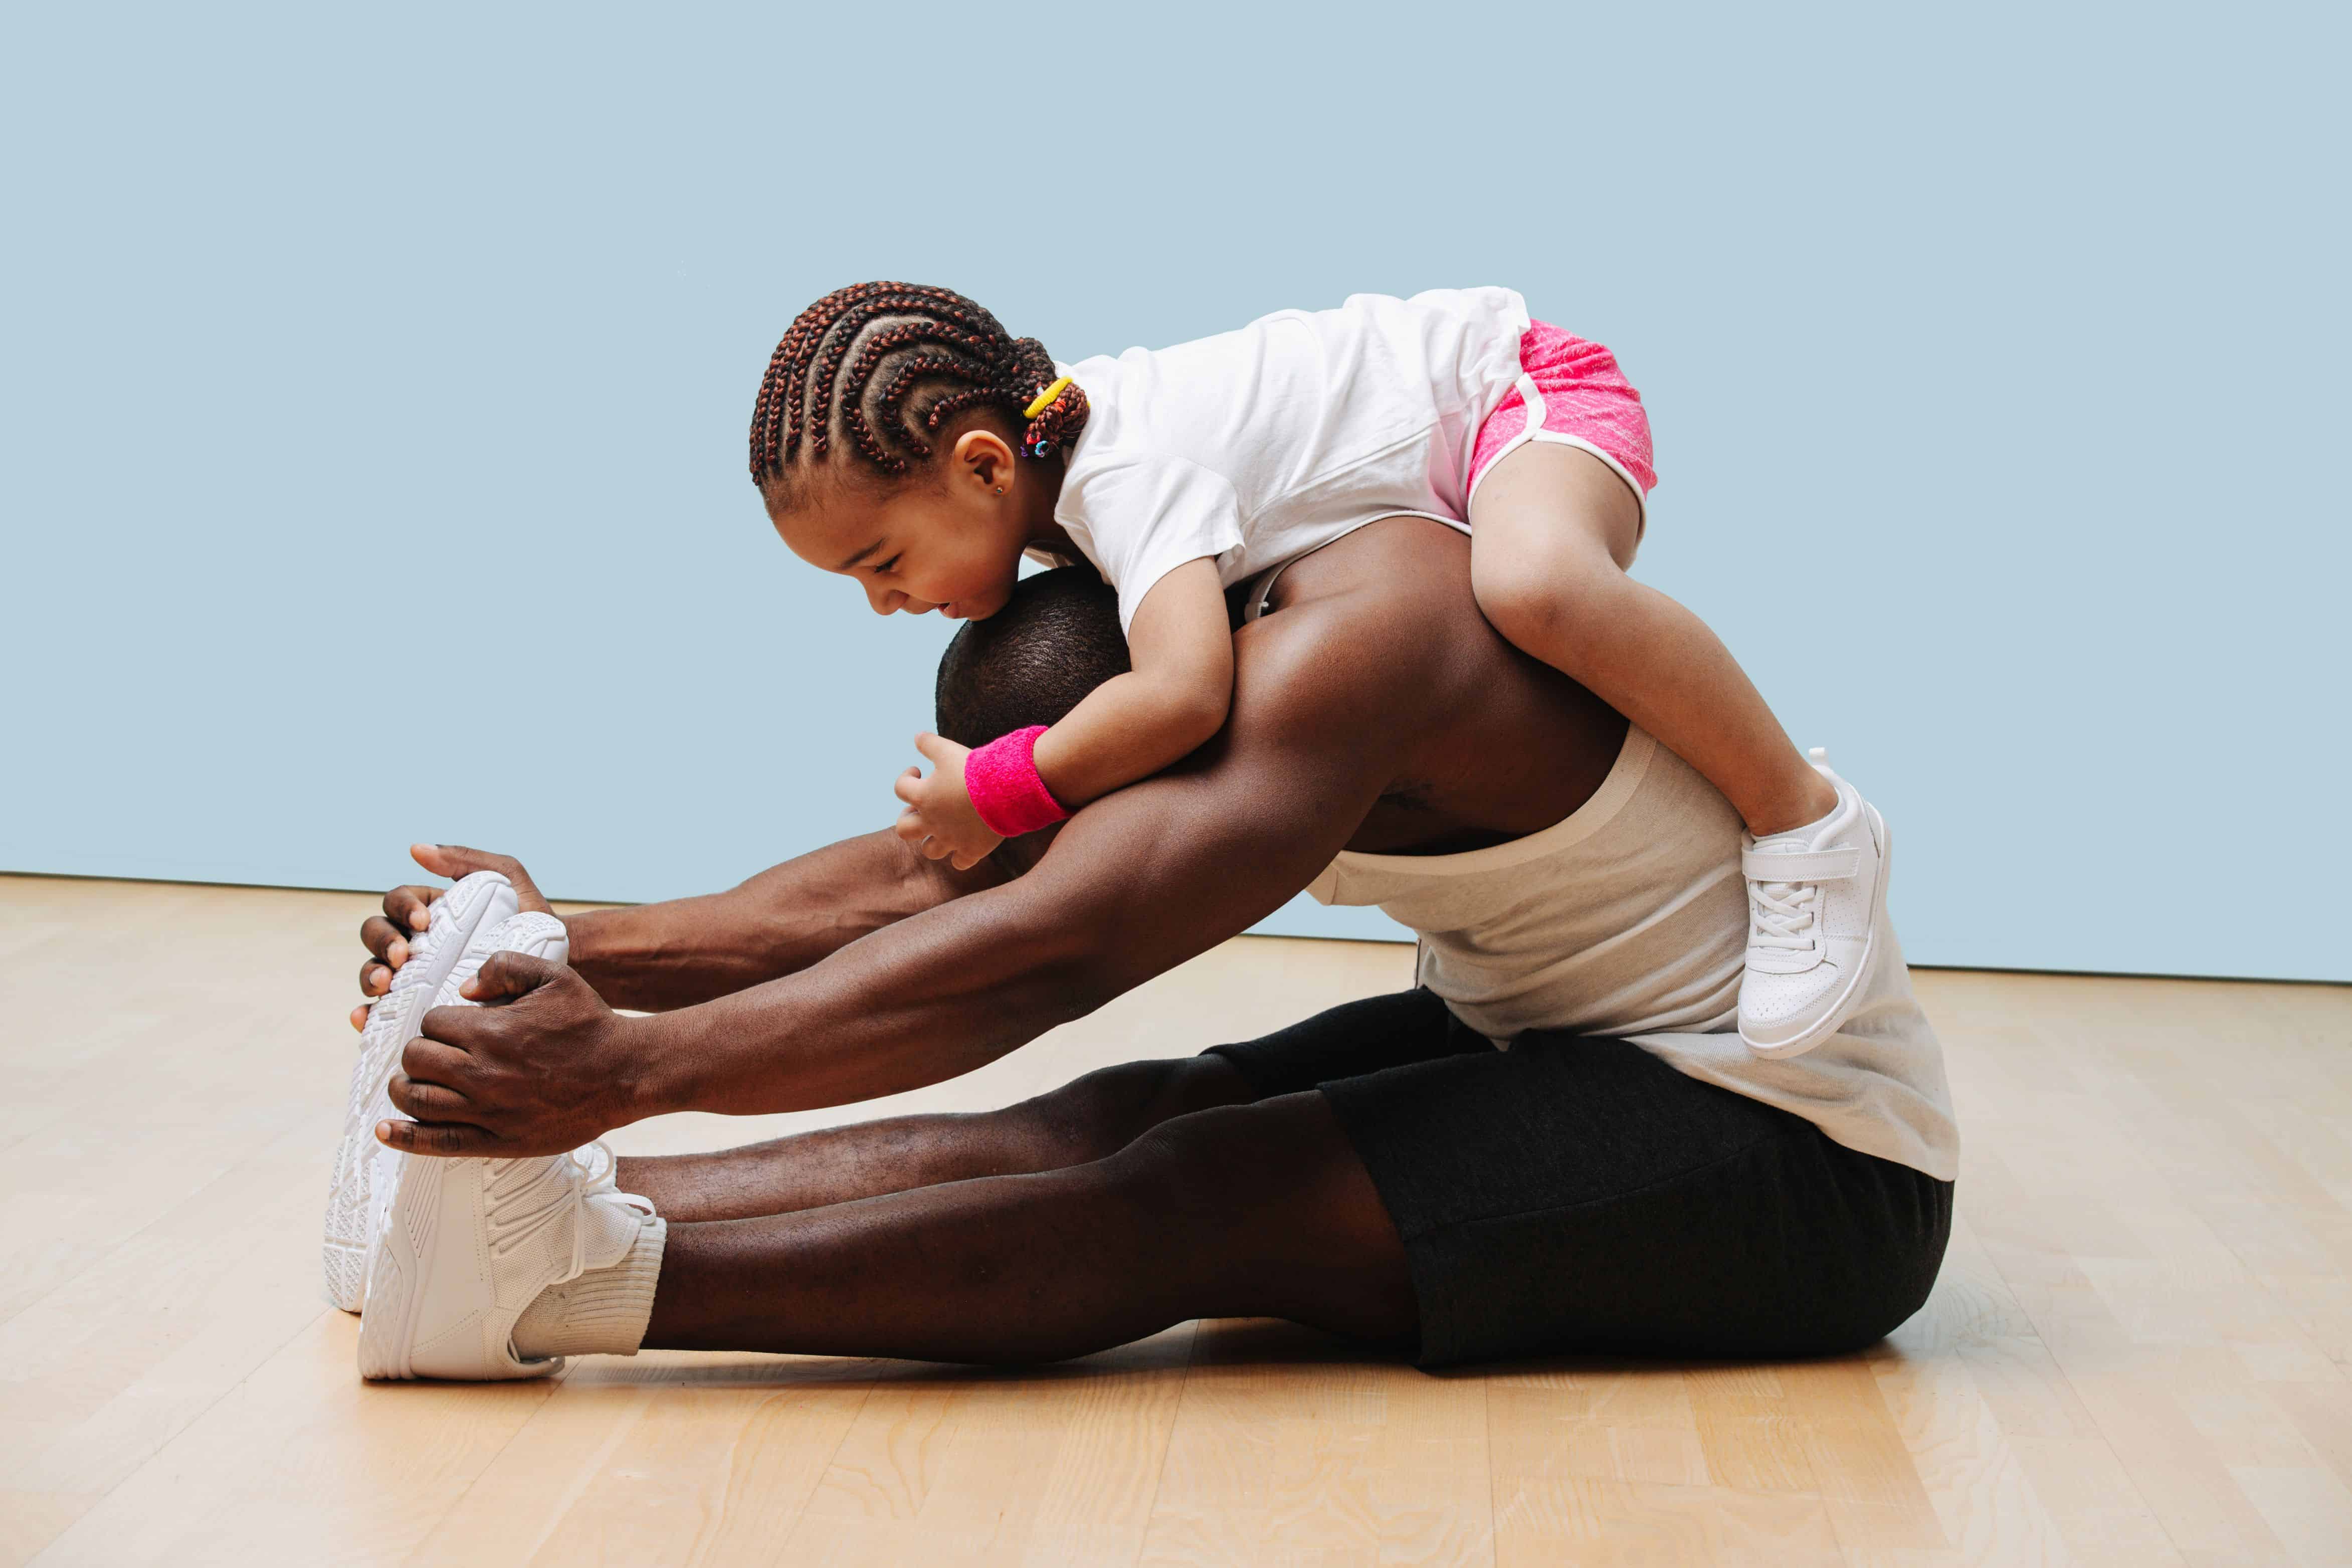 Daughter climbes on her father's neck as he stretches his back and knees on the floor. They having fun, entertaining themselves in isolation.